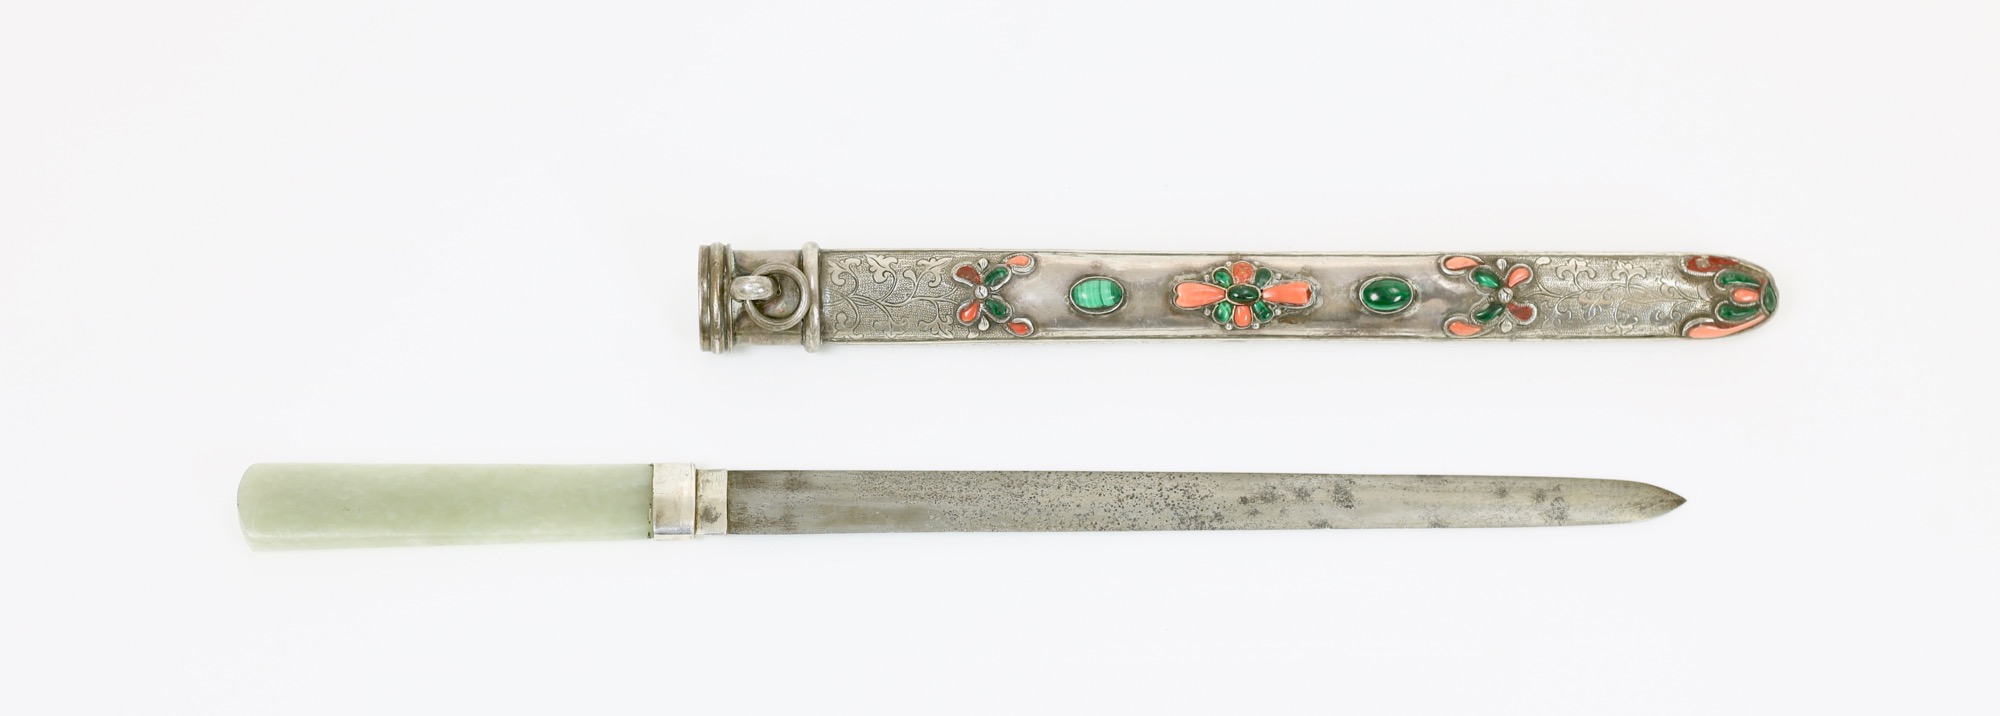 Antique Chinese knife in Mongolian style with double edged blade and jade handle